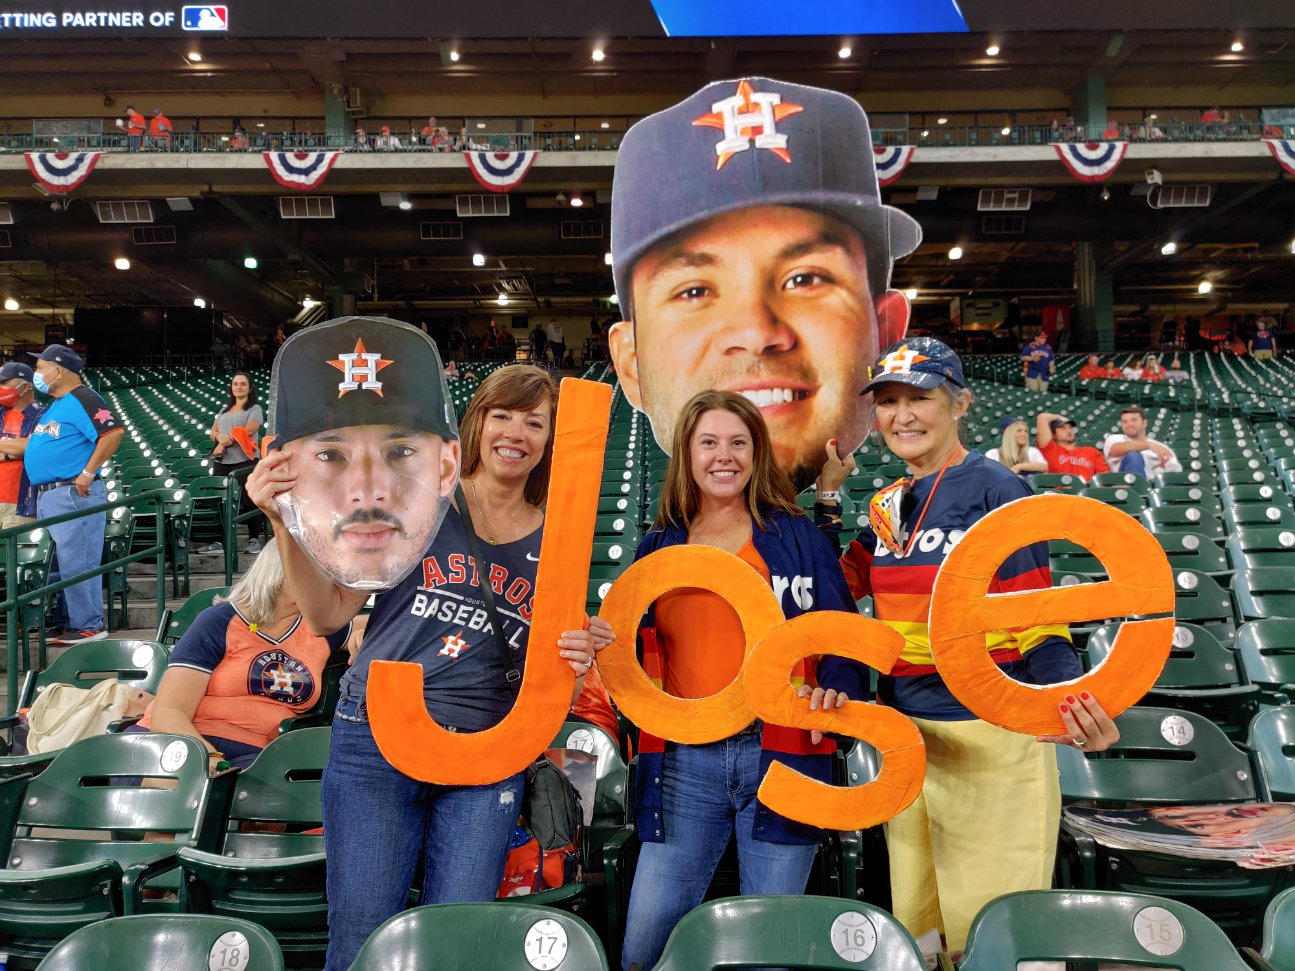 A sign for every single player': Woman popular for making Astros